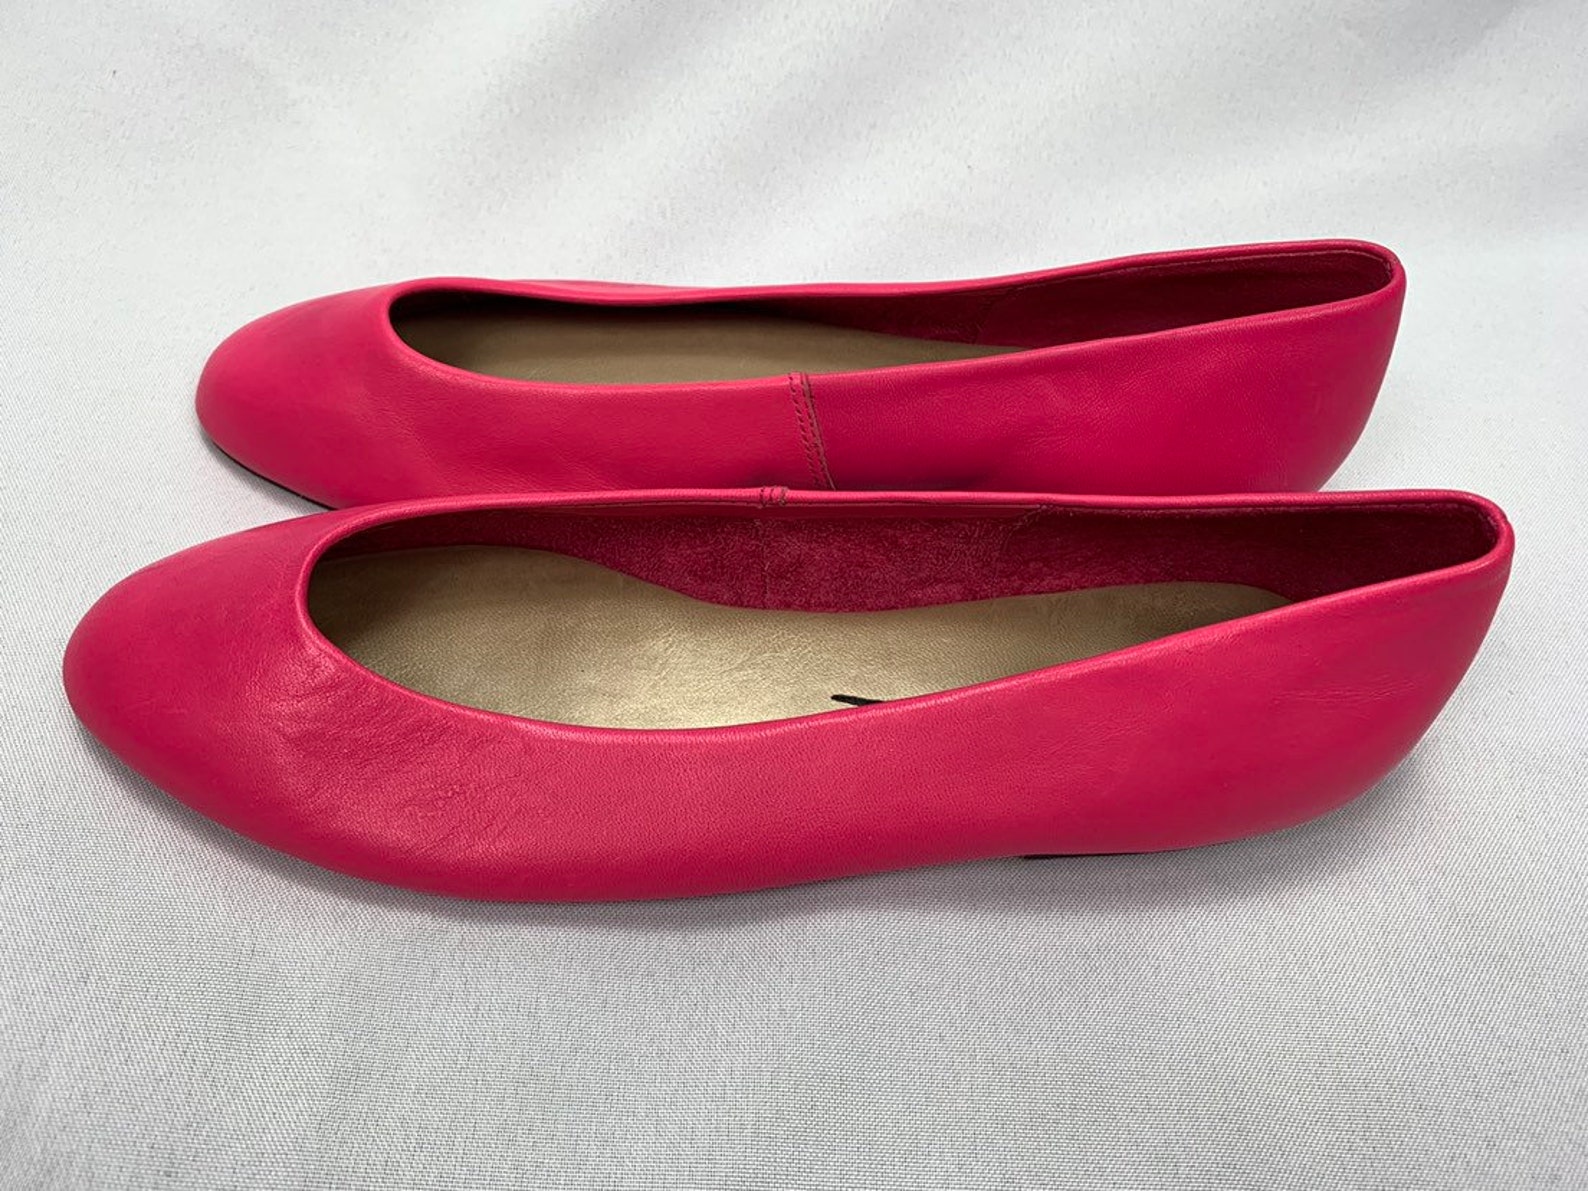 bright pink flat shoes